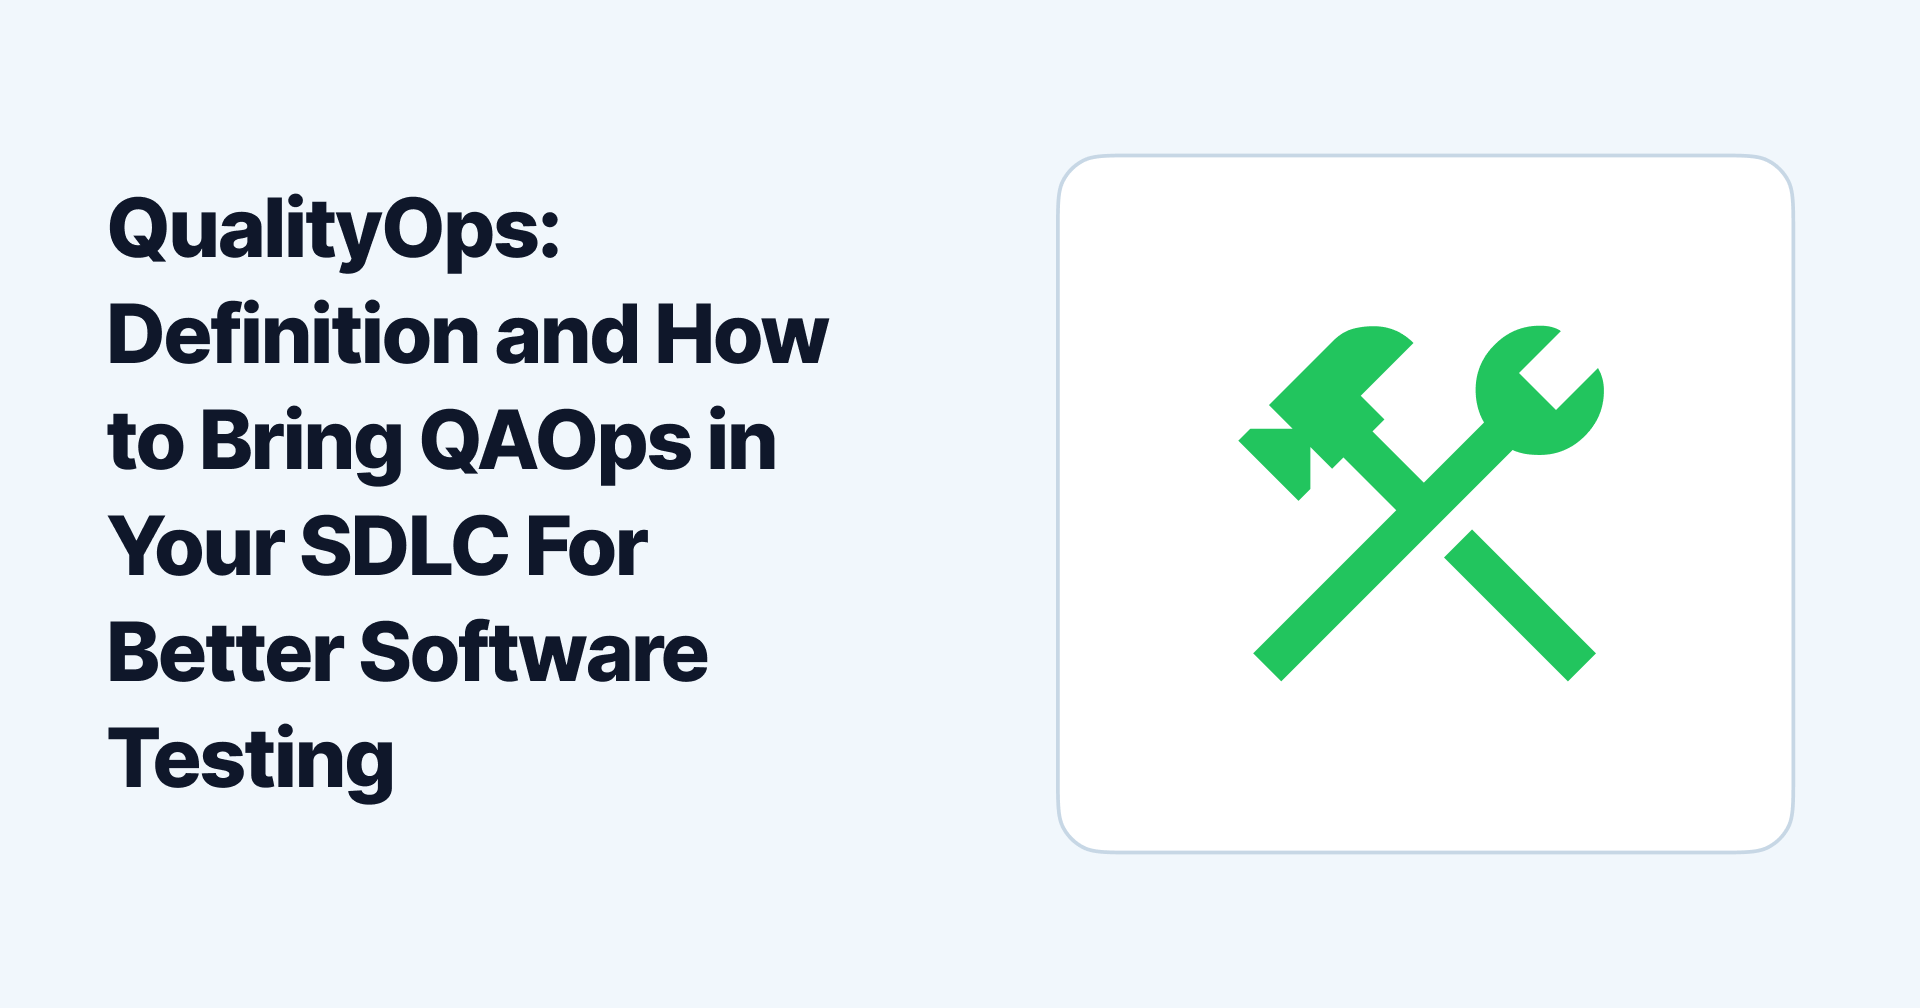 QualityOps: Definition and How to Bring QAOps in Your SDLC For Better Software Testing